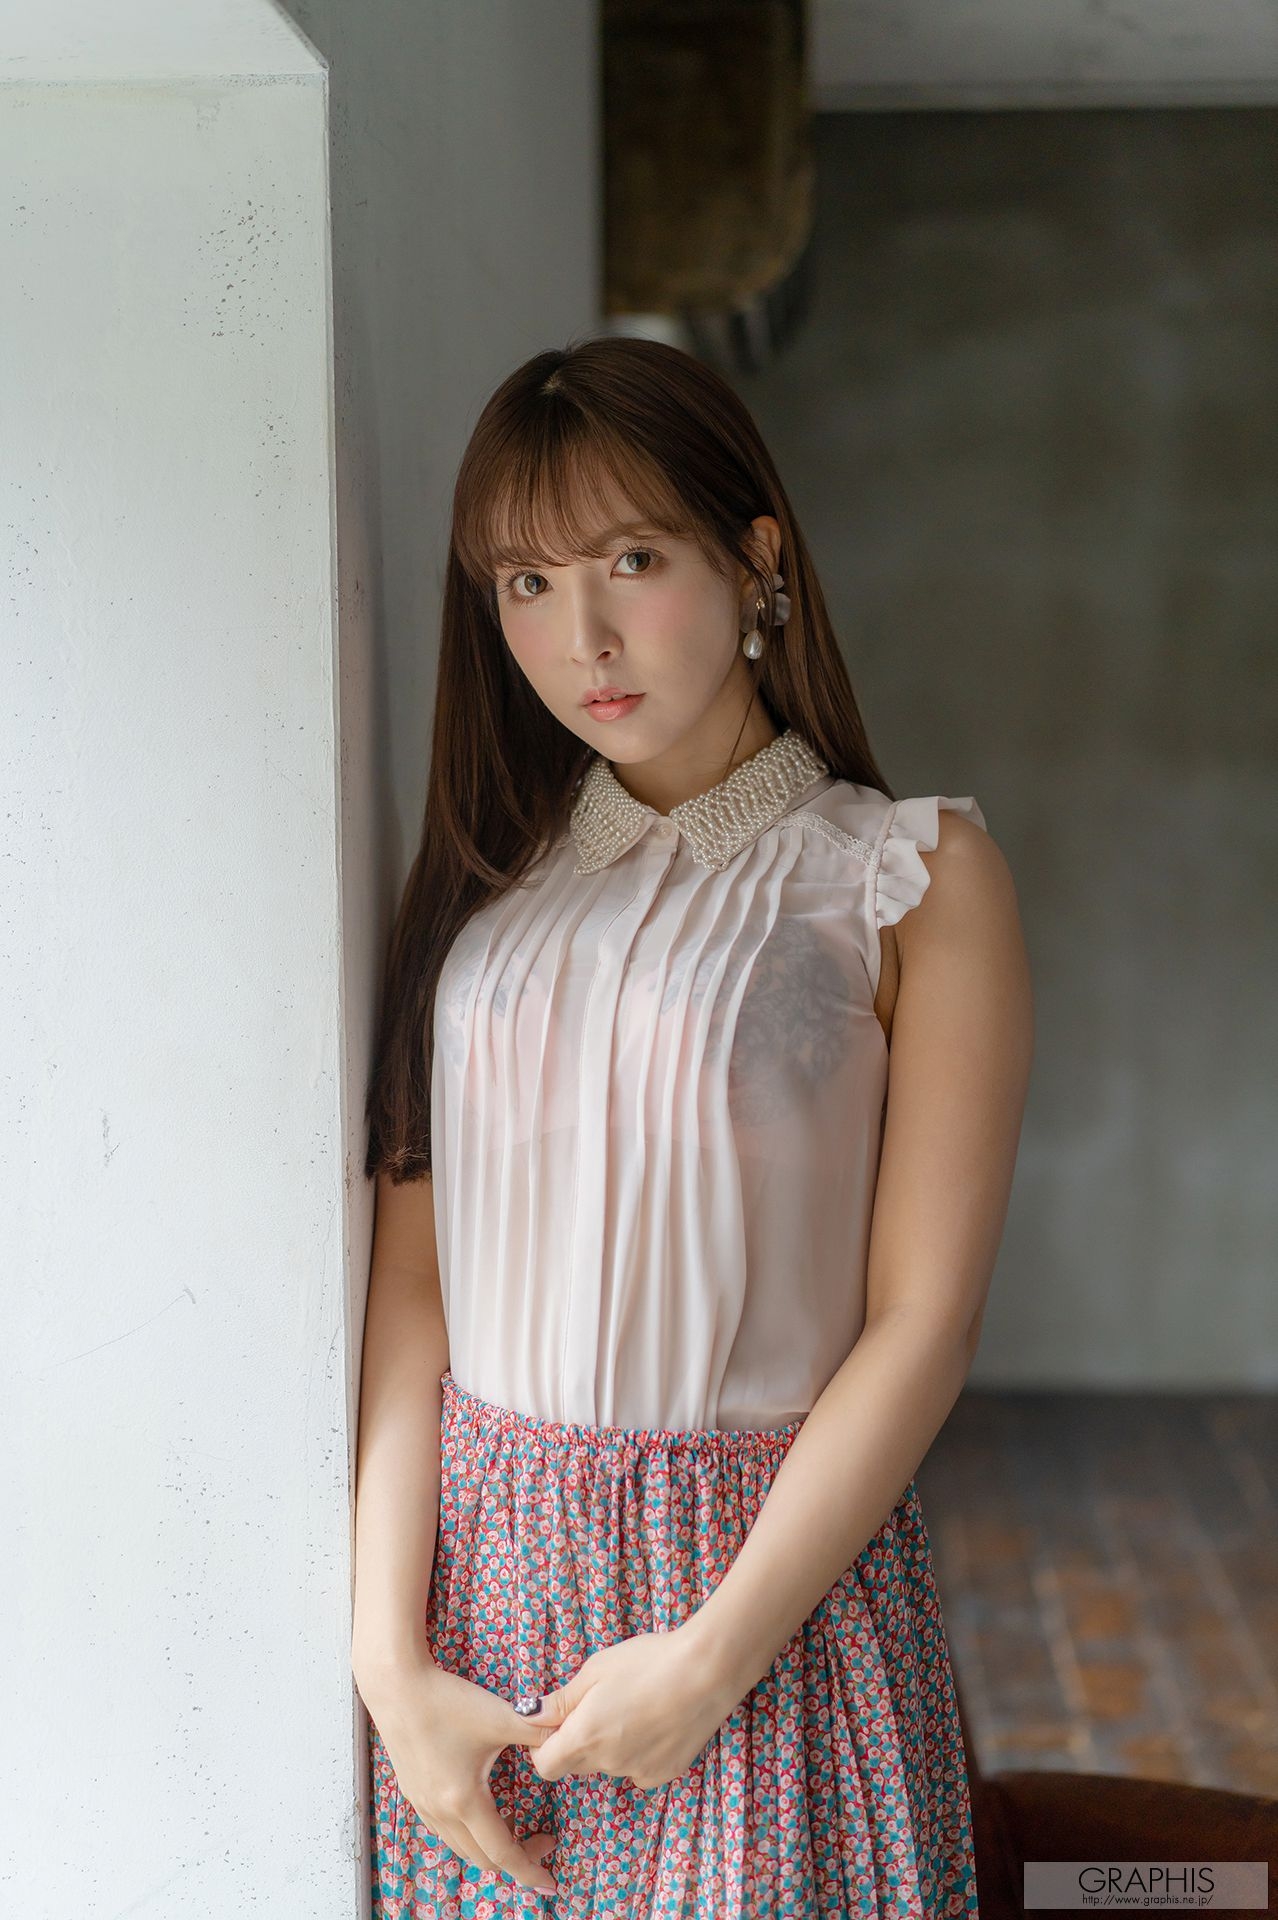 [Graphis] Limited Edition Yua Mikami 三上悠亜 3  第-1张